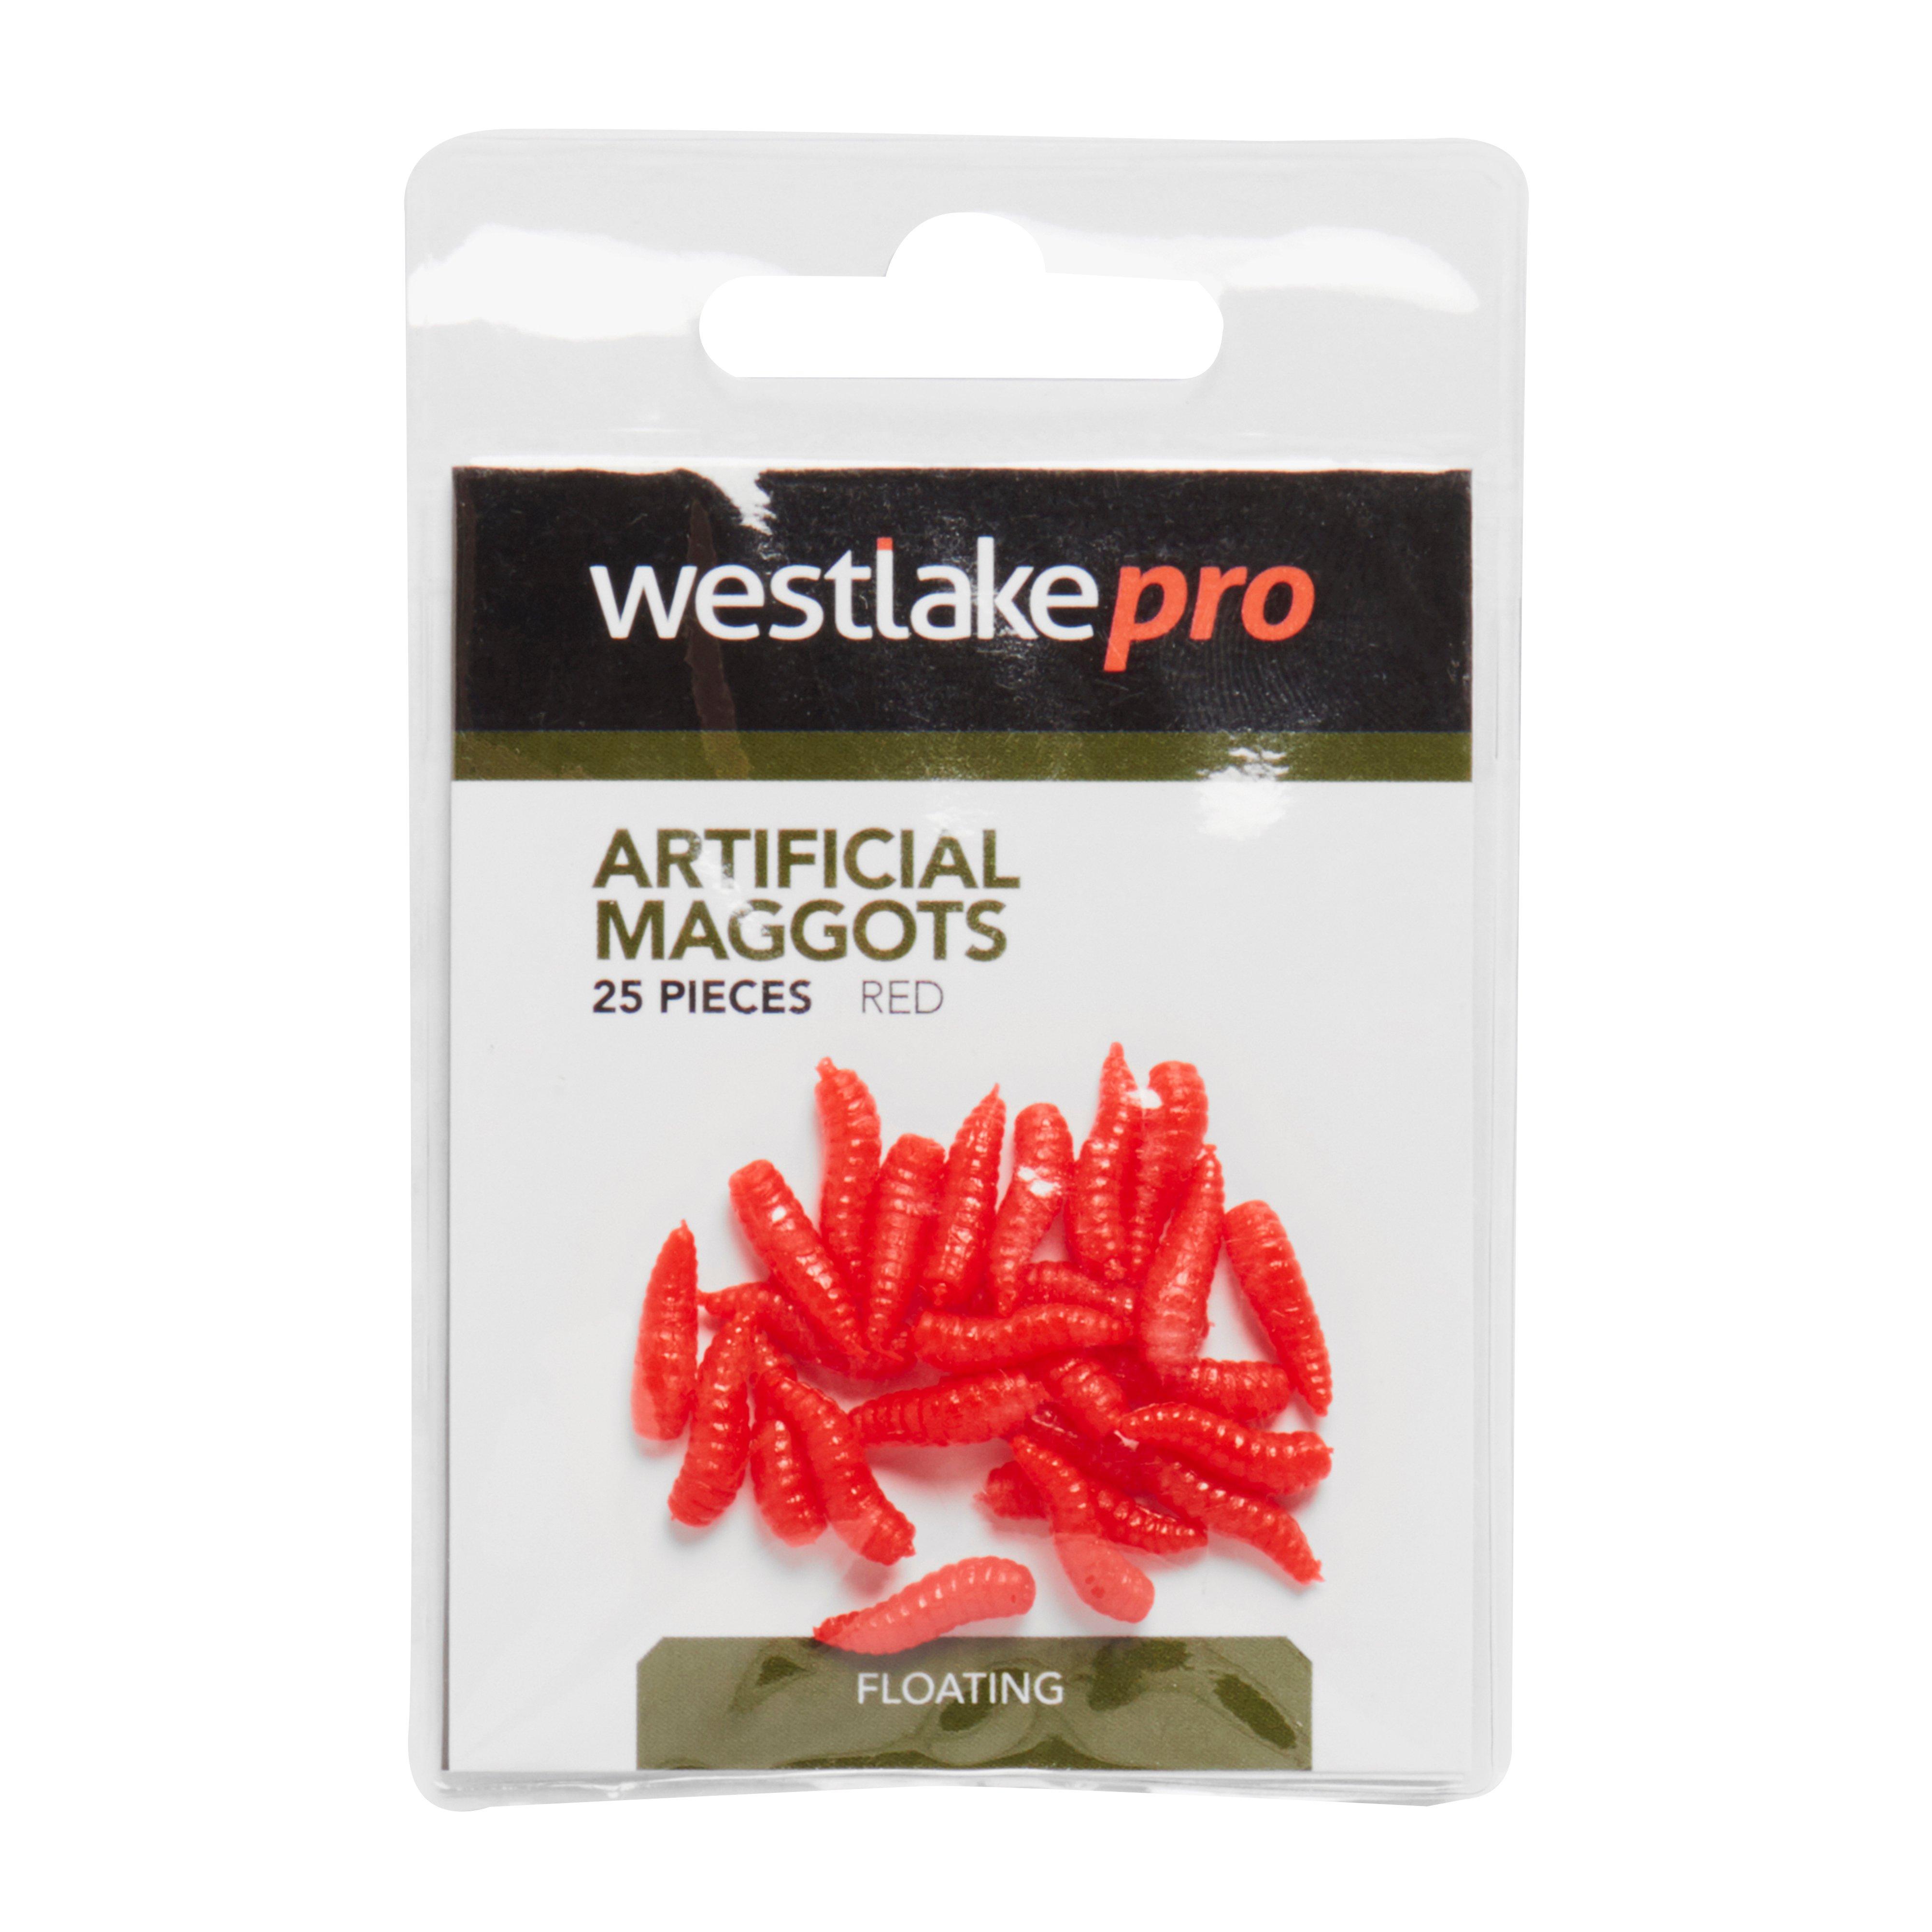 Westlake Maggots Red Floating 10Pc Review